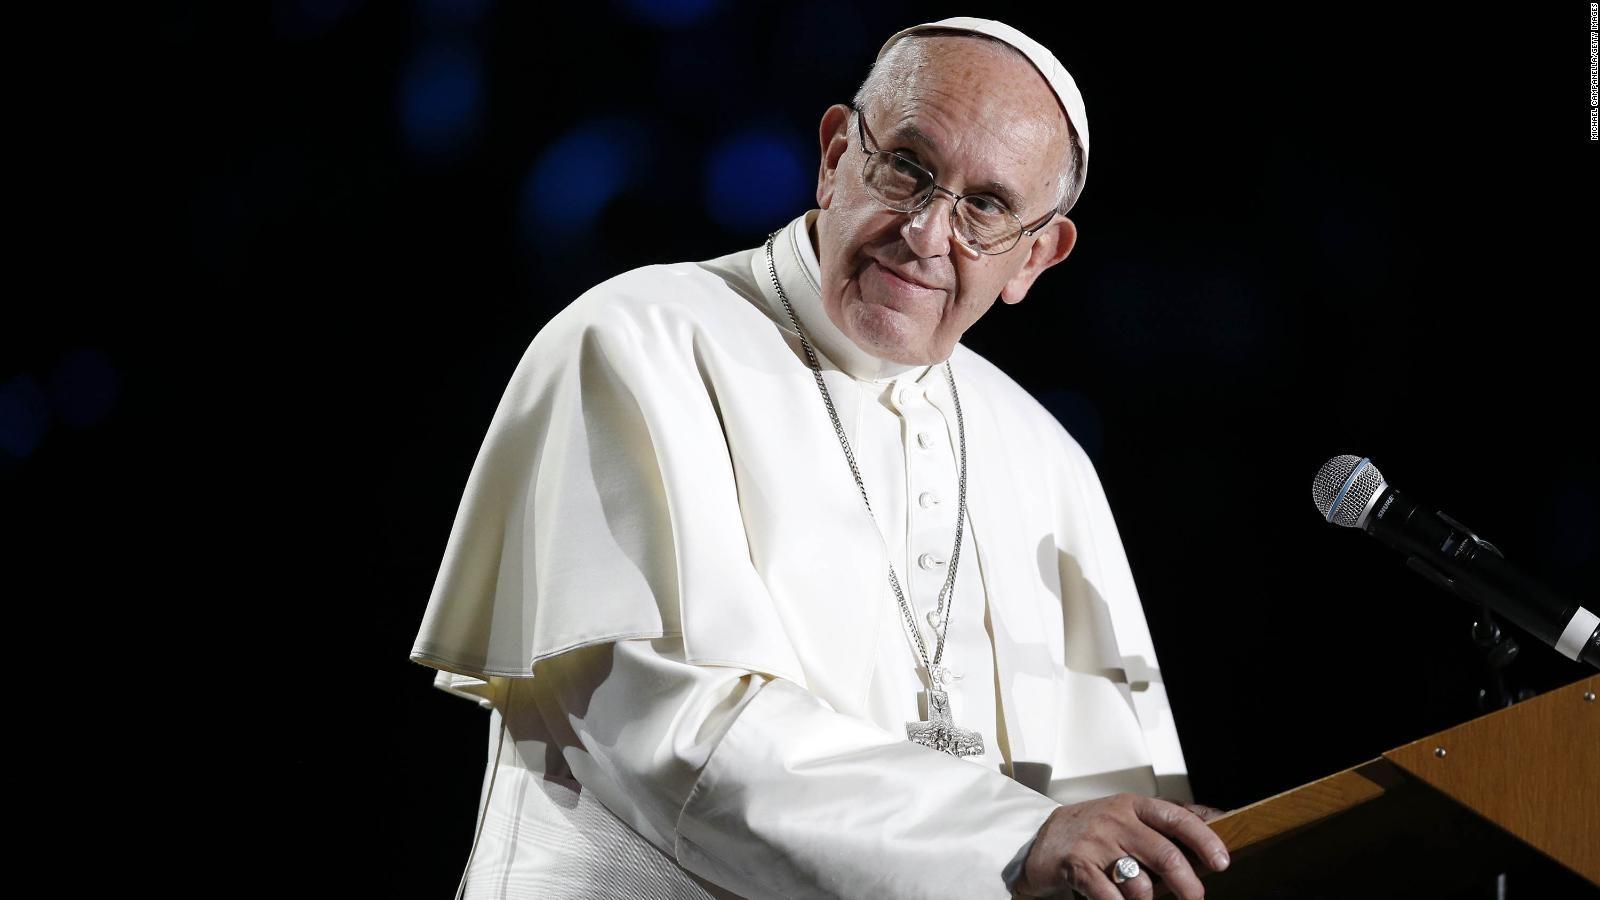 Pope Francis tells gay man: 'God made you like that'